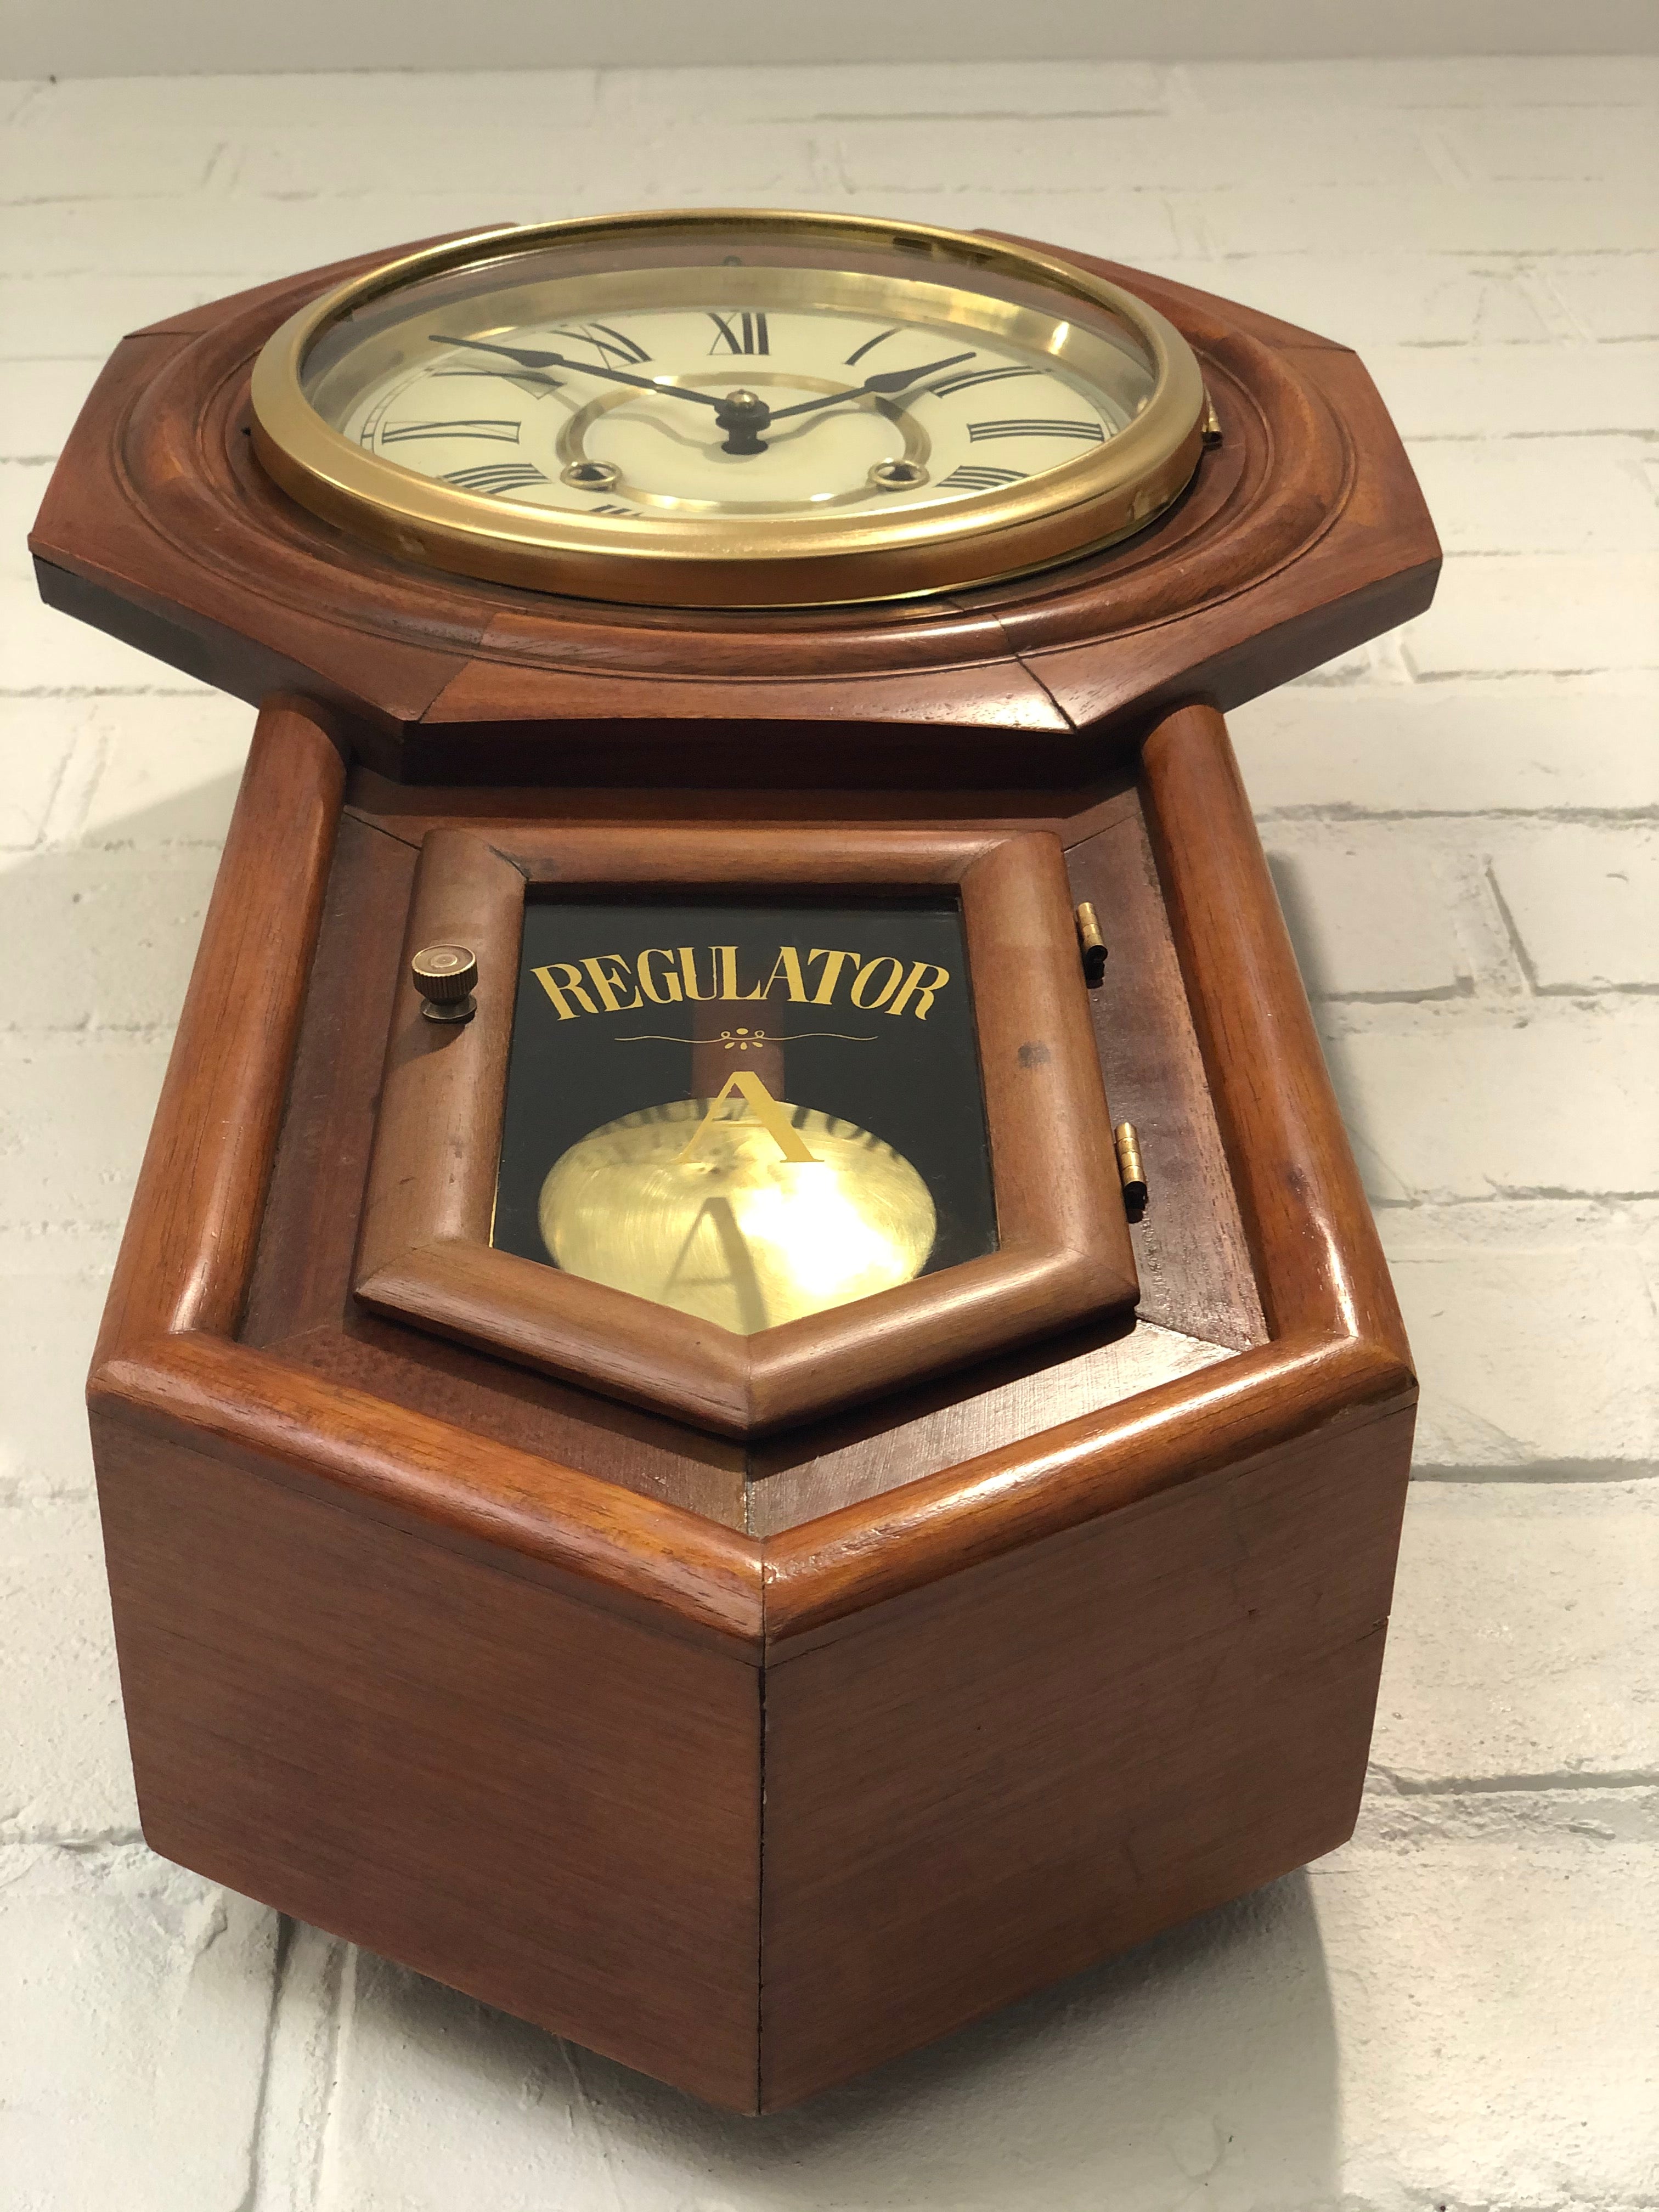 Vintage Regulator Chime Wall Clock | eXibit collection